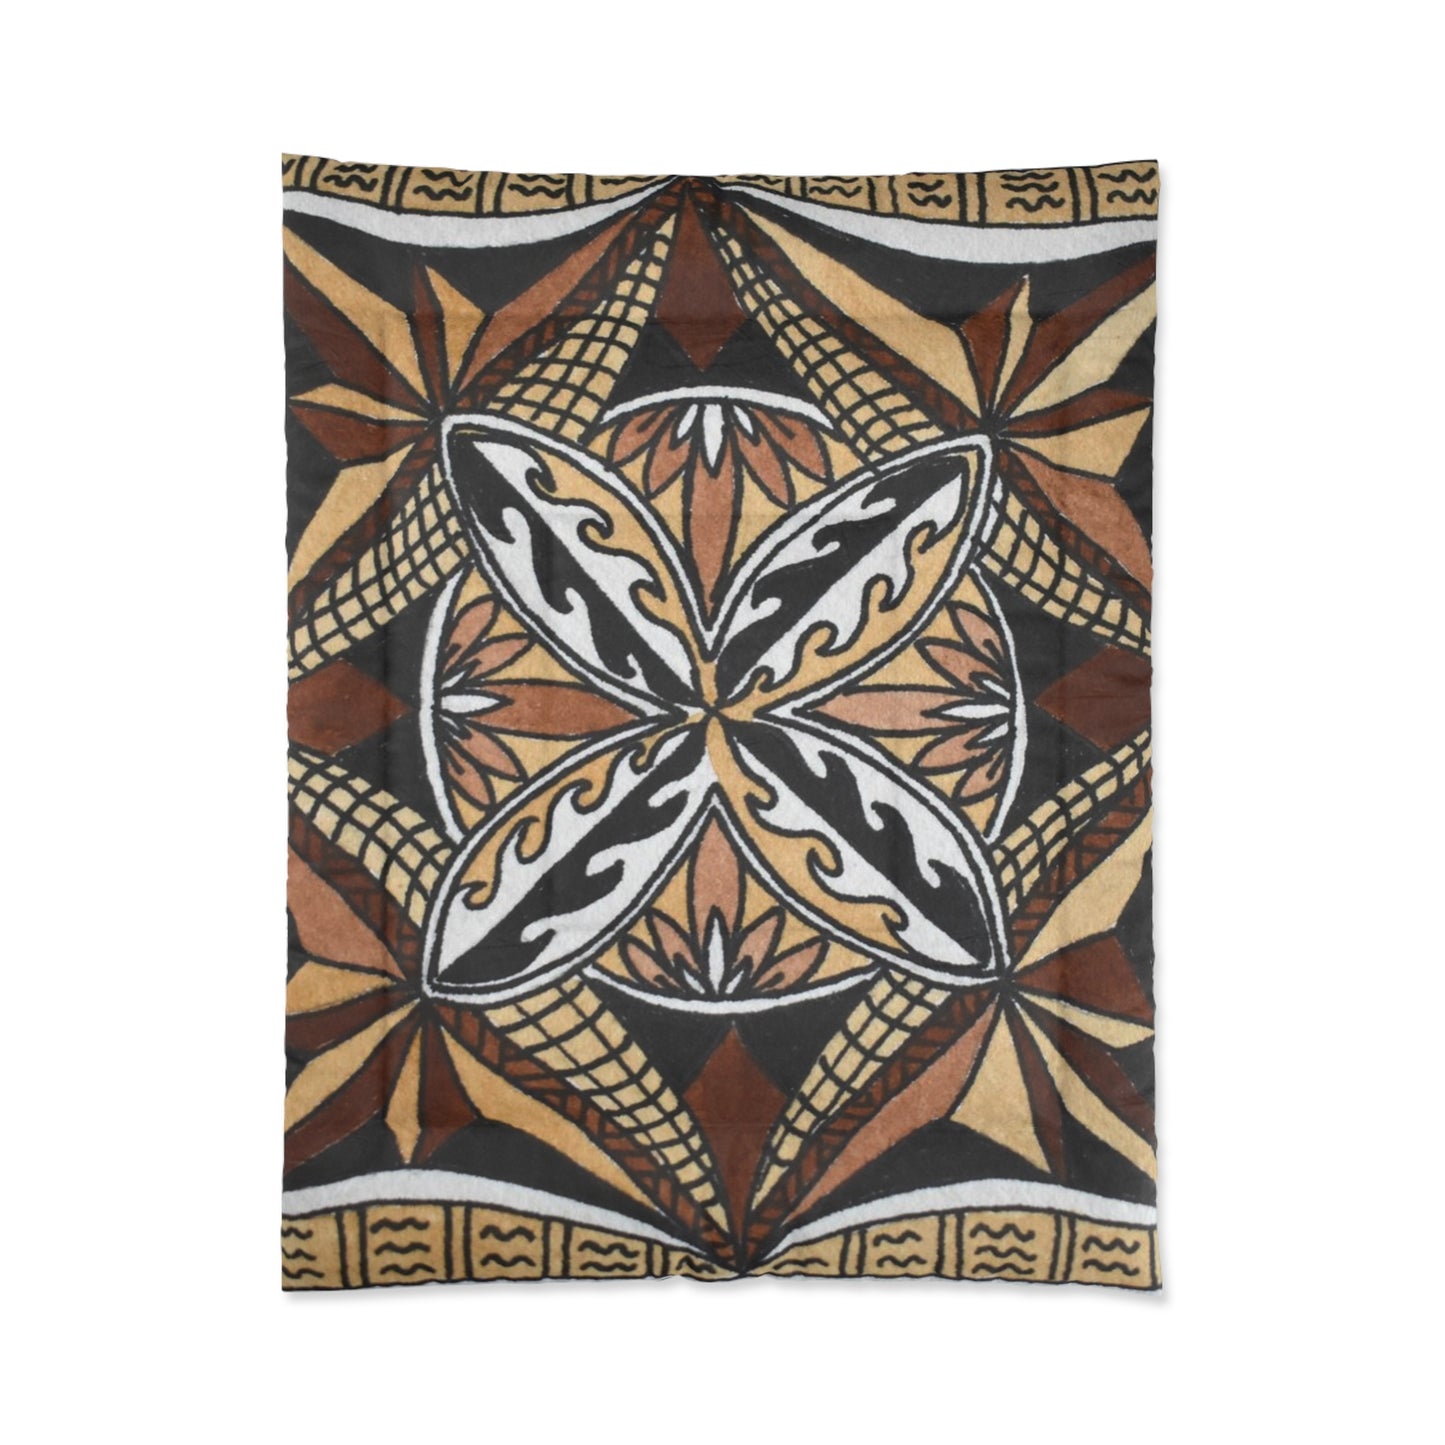 The Ultimate Comfort Doona Blanket with a Square Tapa Design